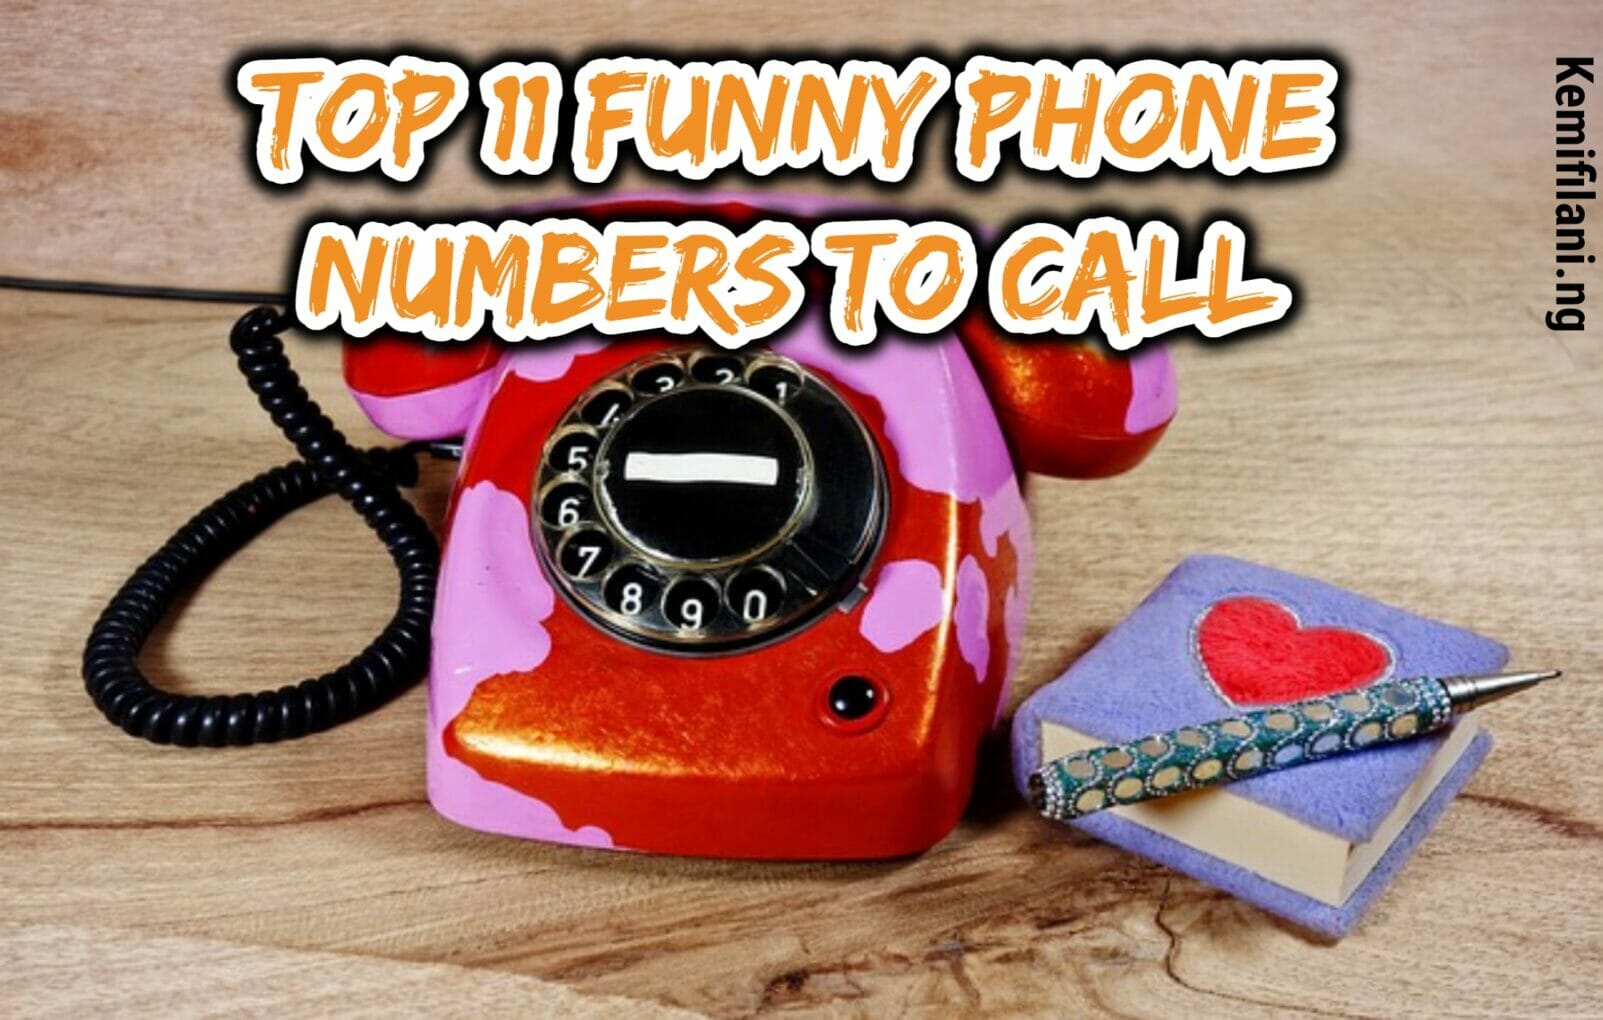 Top 11 funny phone numbers to call - you will never get bored again - Kemi  Filani